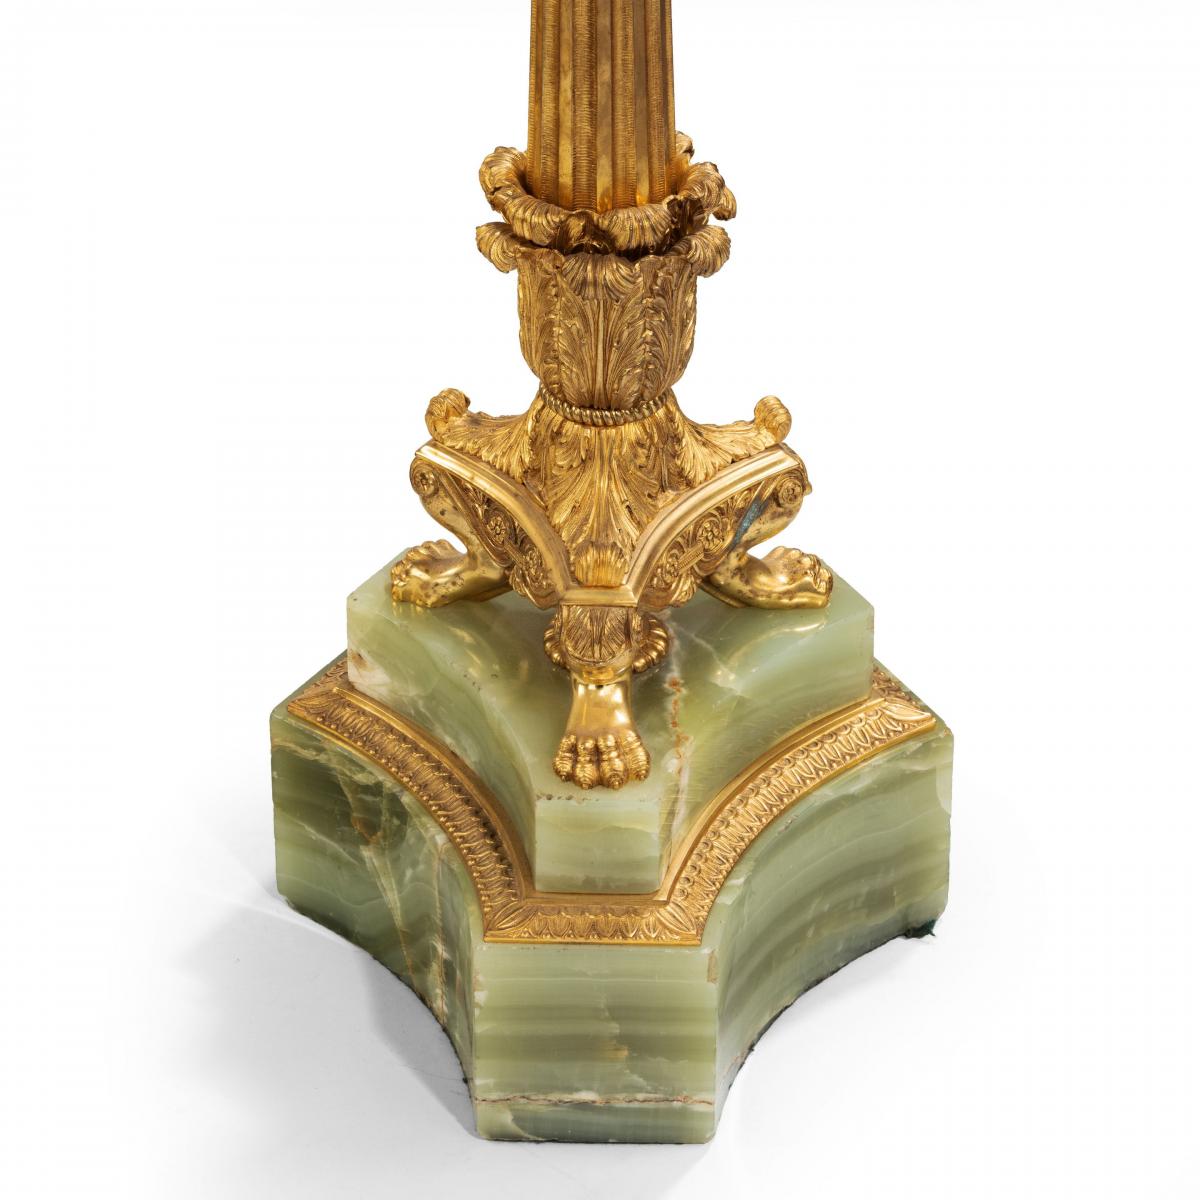 A large pair of onyx and ormolu lamps